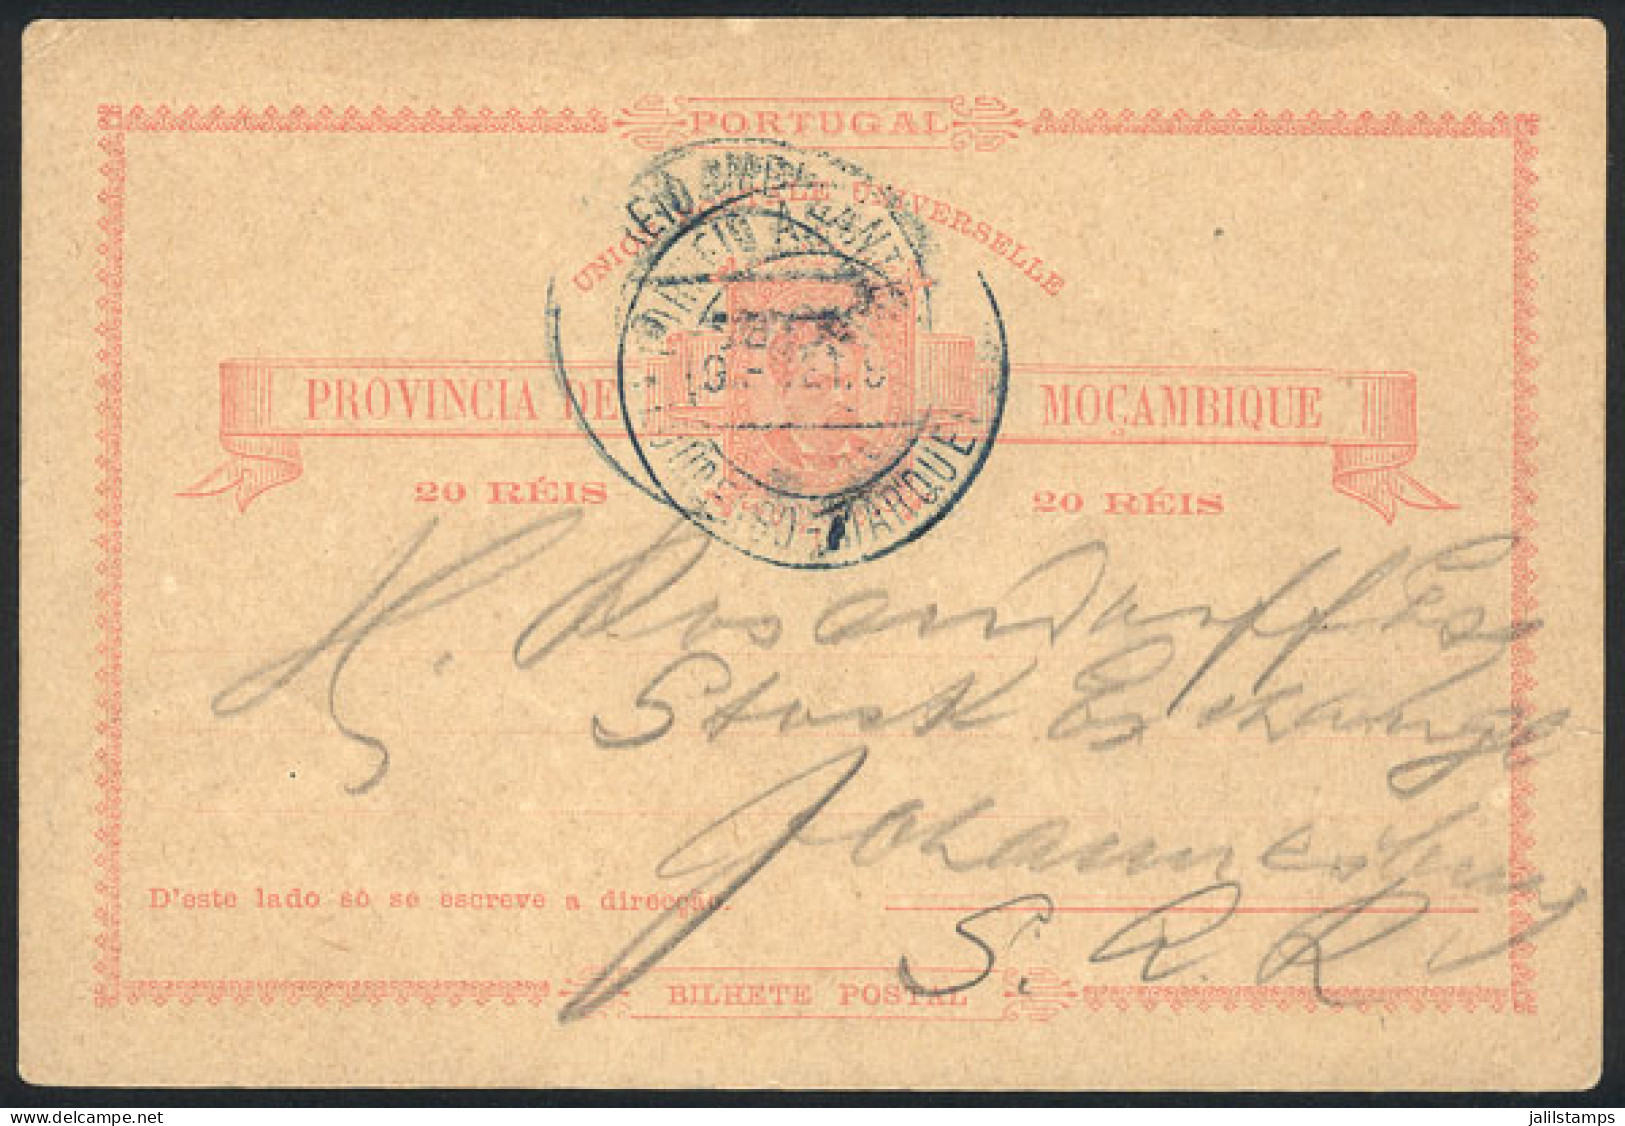 MOZAMBIQUE: 20Rs. Postal Card Sent From Lourenço Marques To Johannesburg On 9/SE/1898, Excellent! - Mozambico